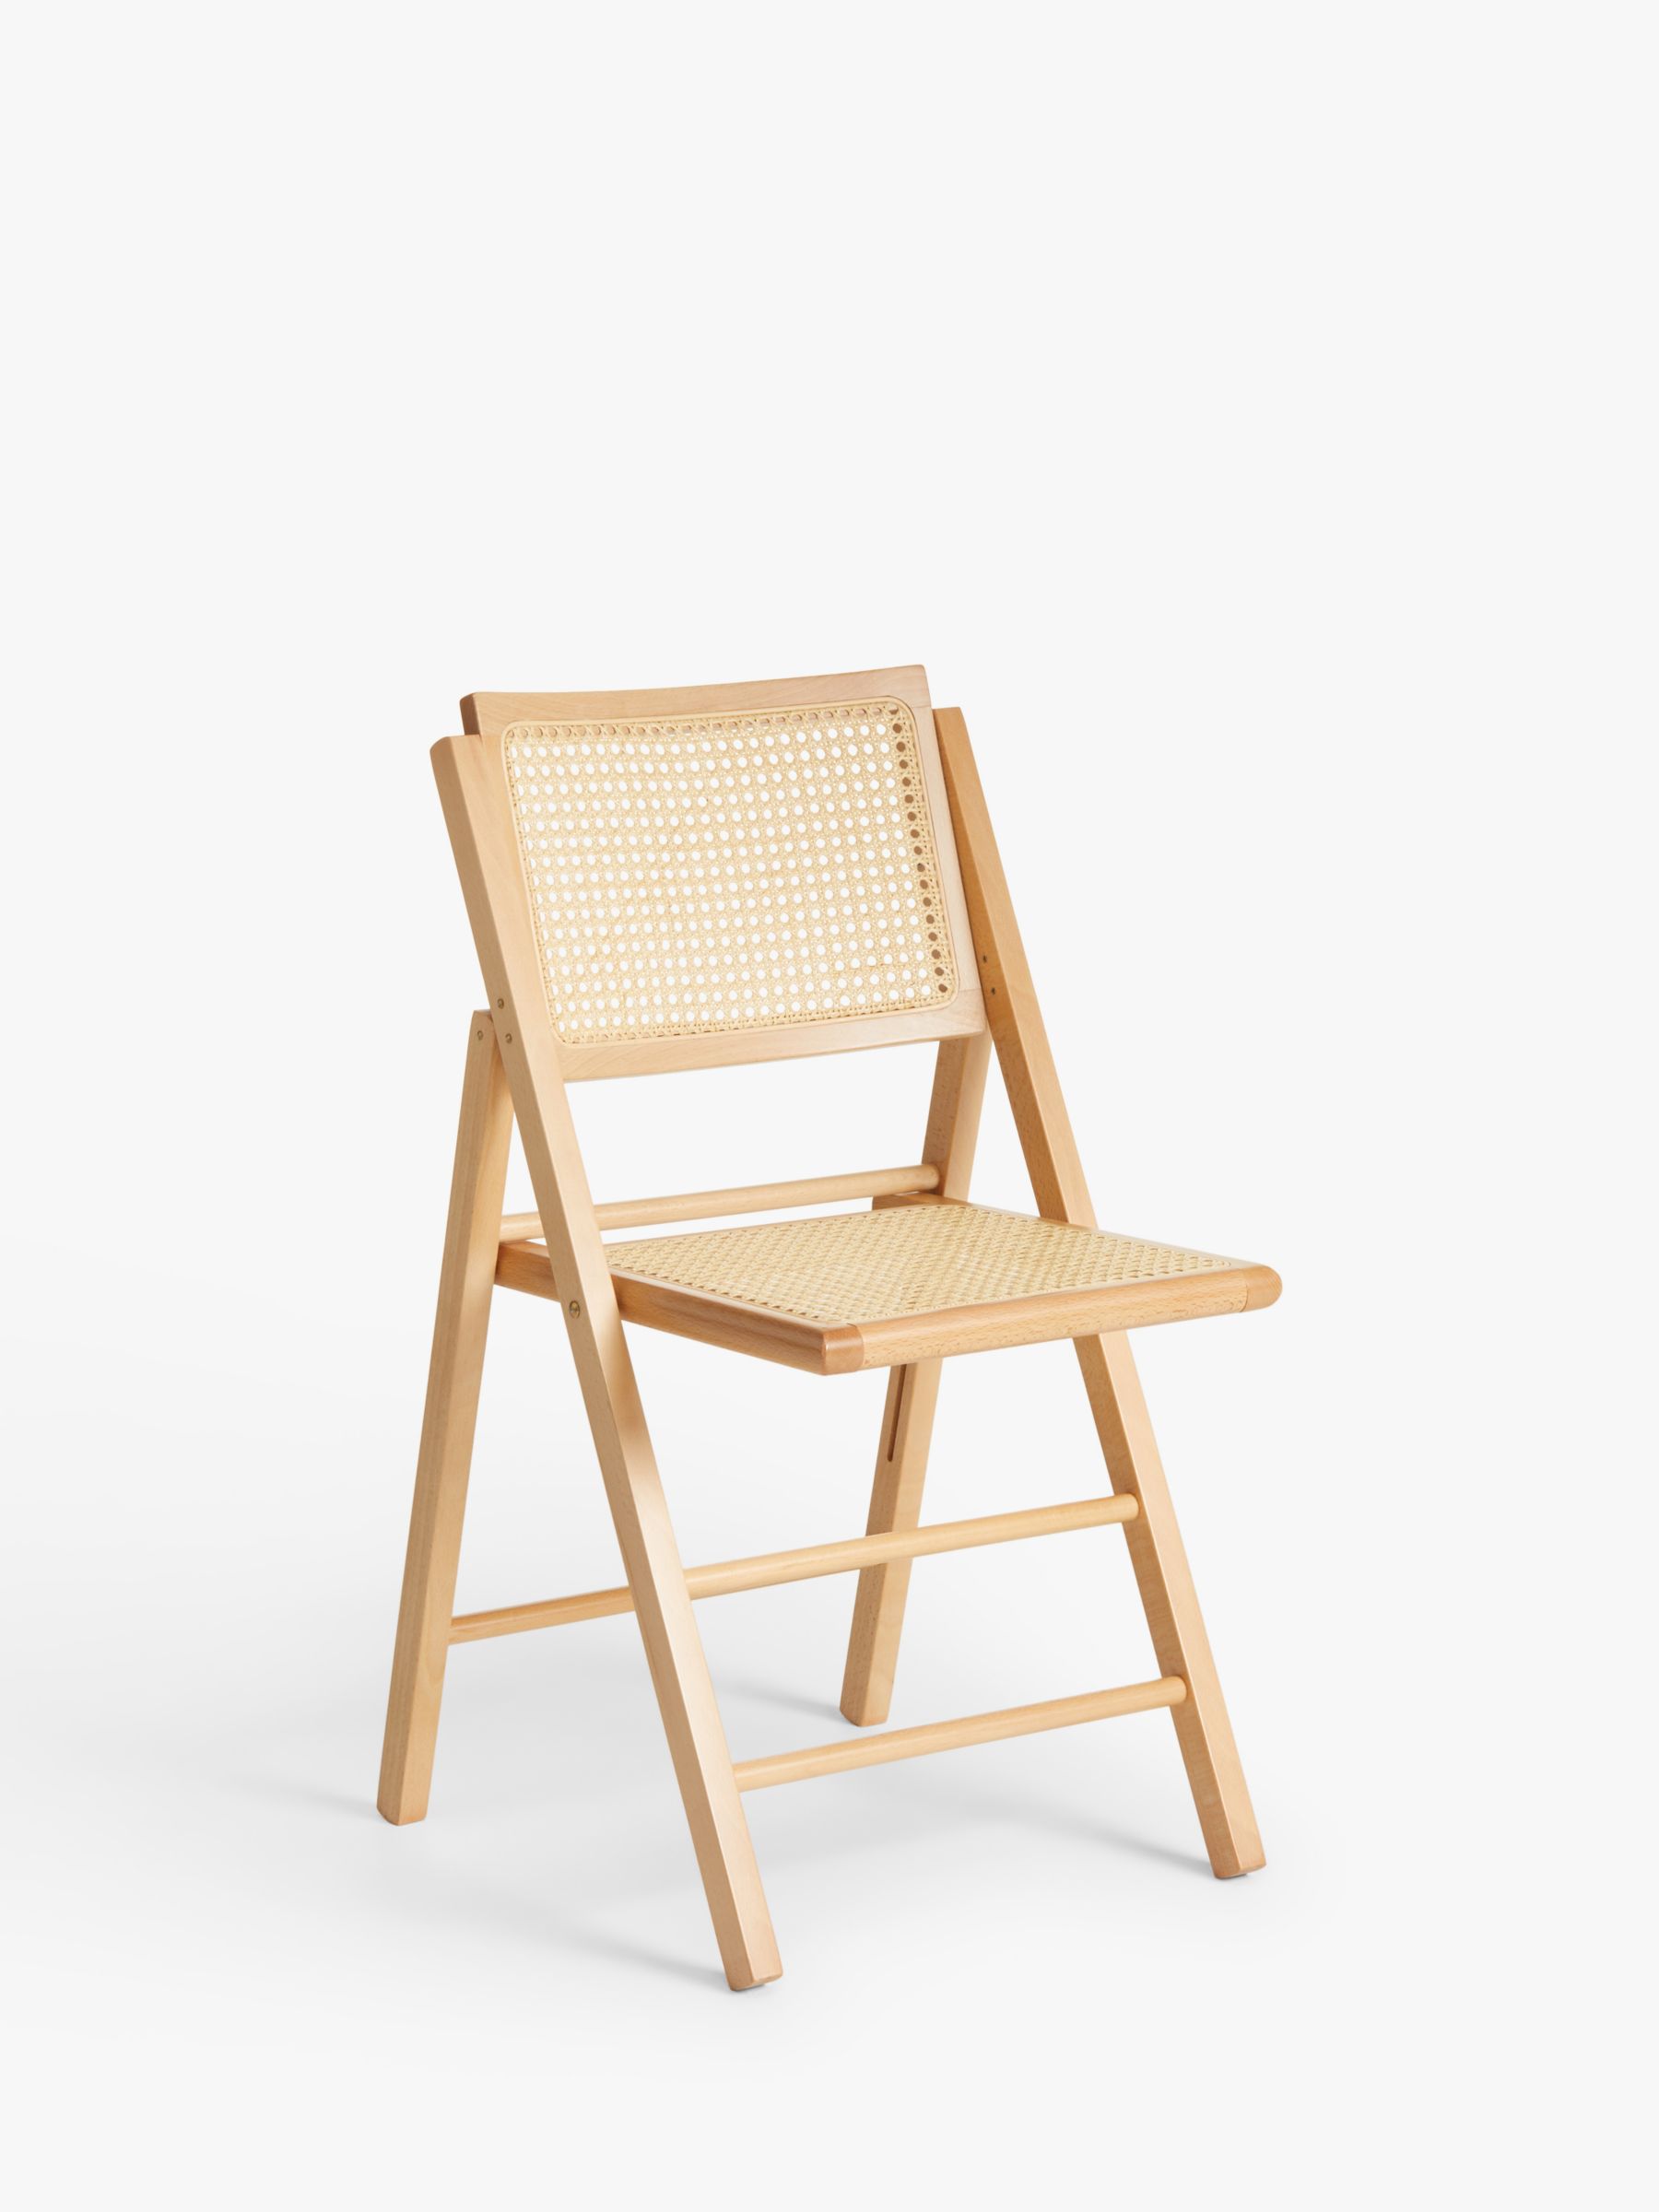 Photo of John lewis anyday rattan folding chair